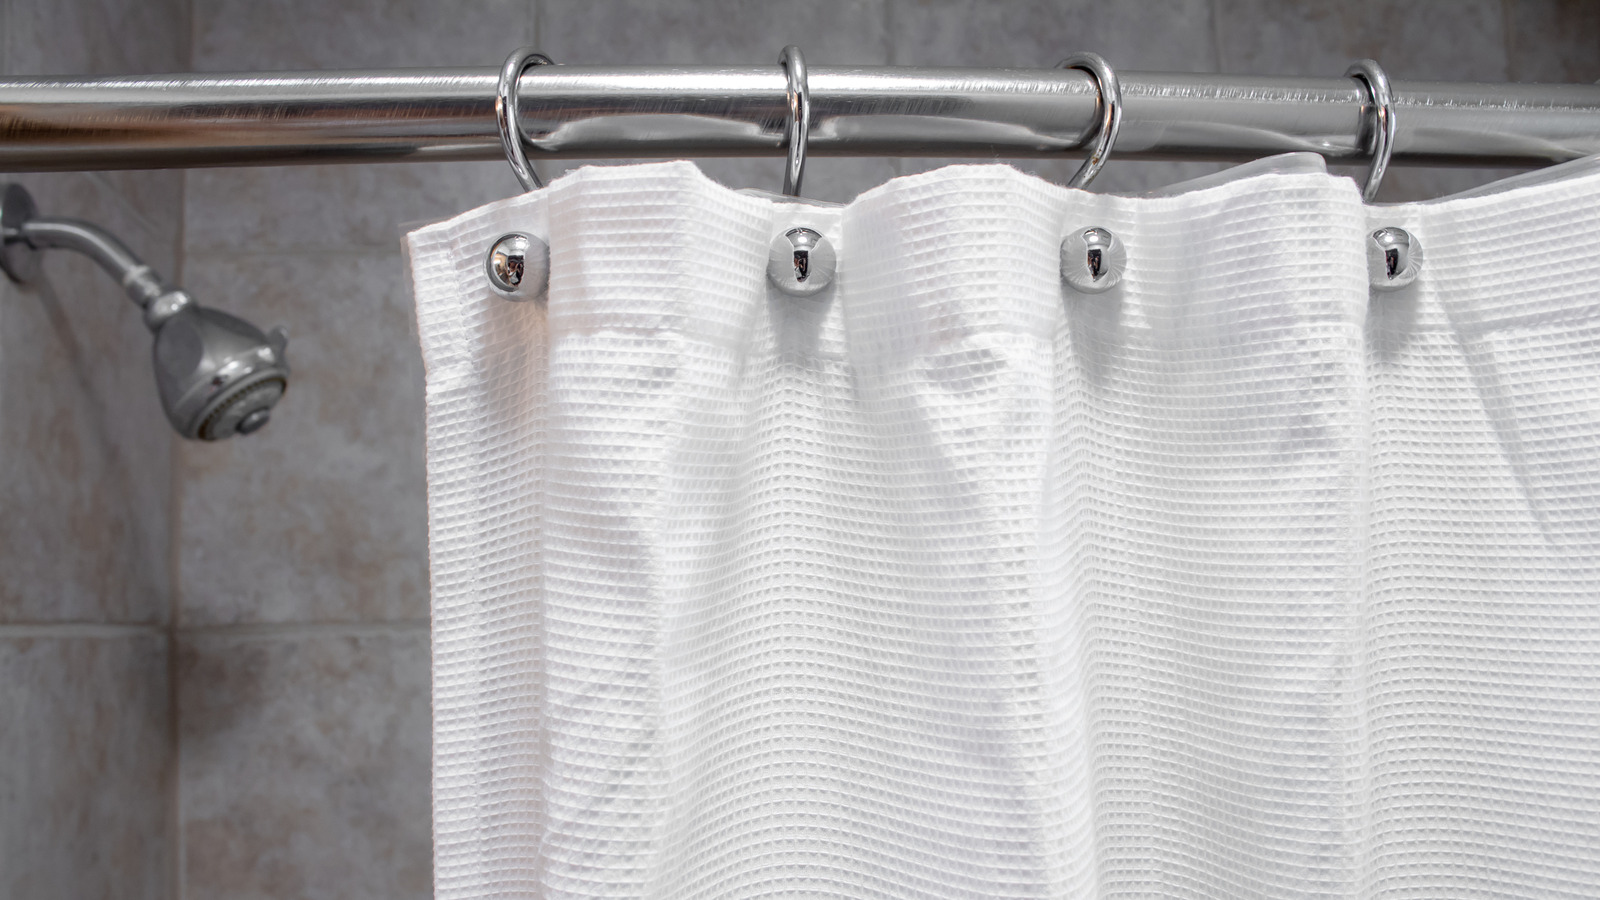 Replace Your Shower Curtain, How To Clean A Plastic Shower Curtain Liner In The Washing Machine